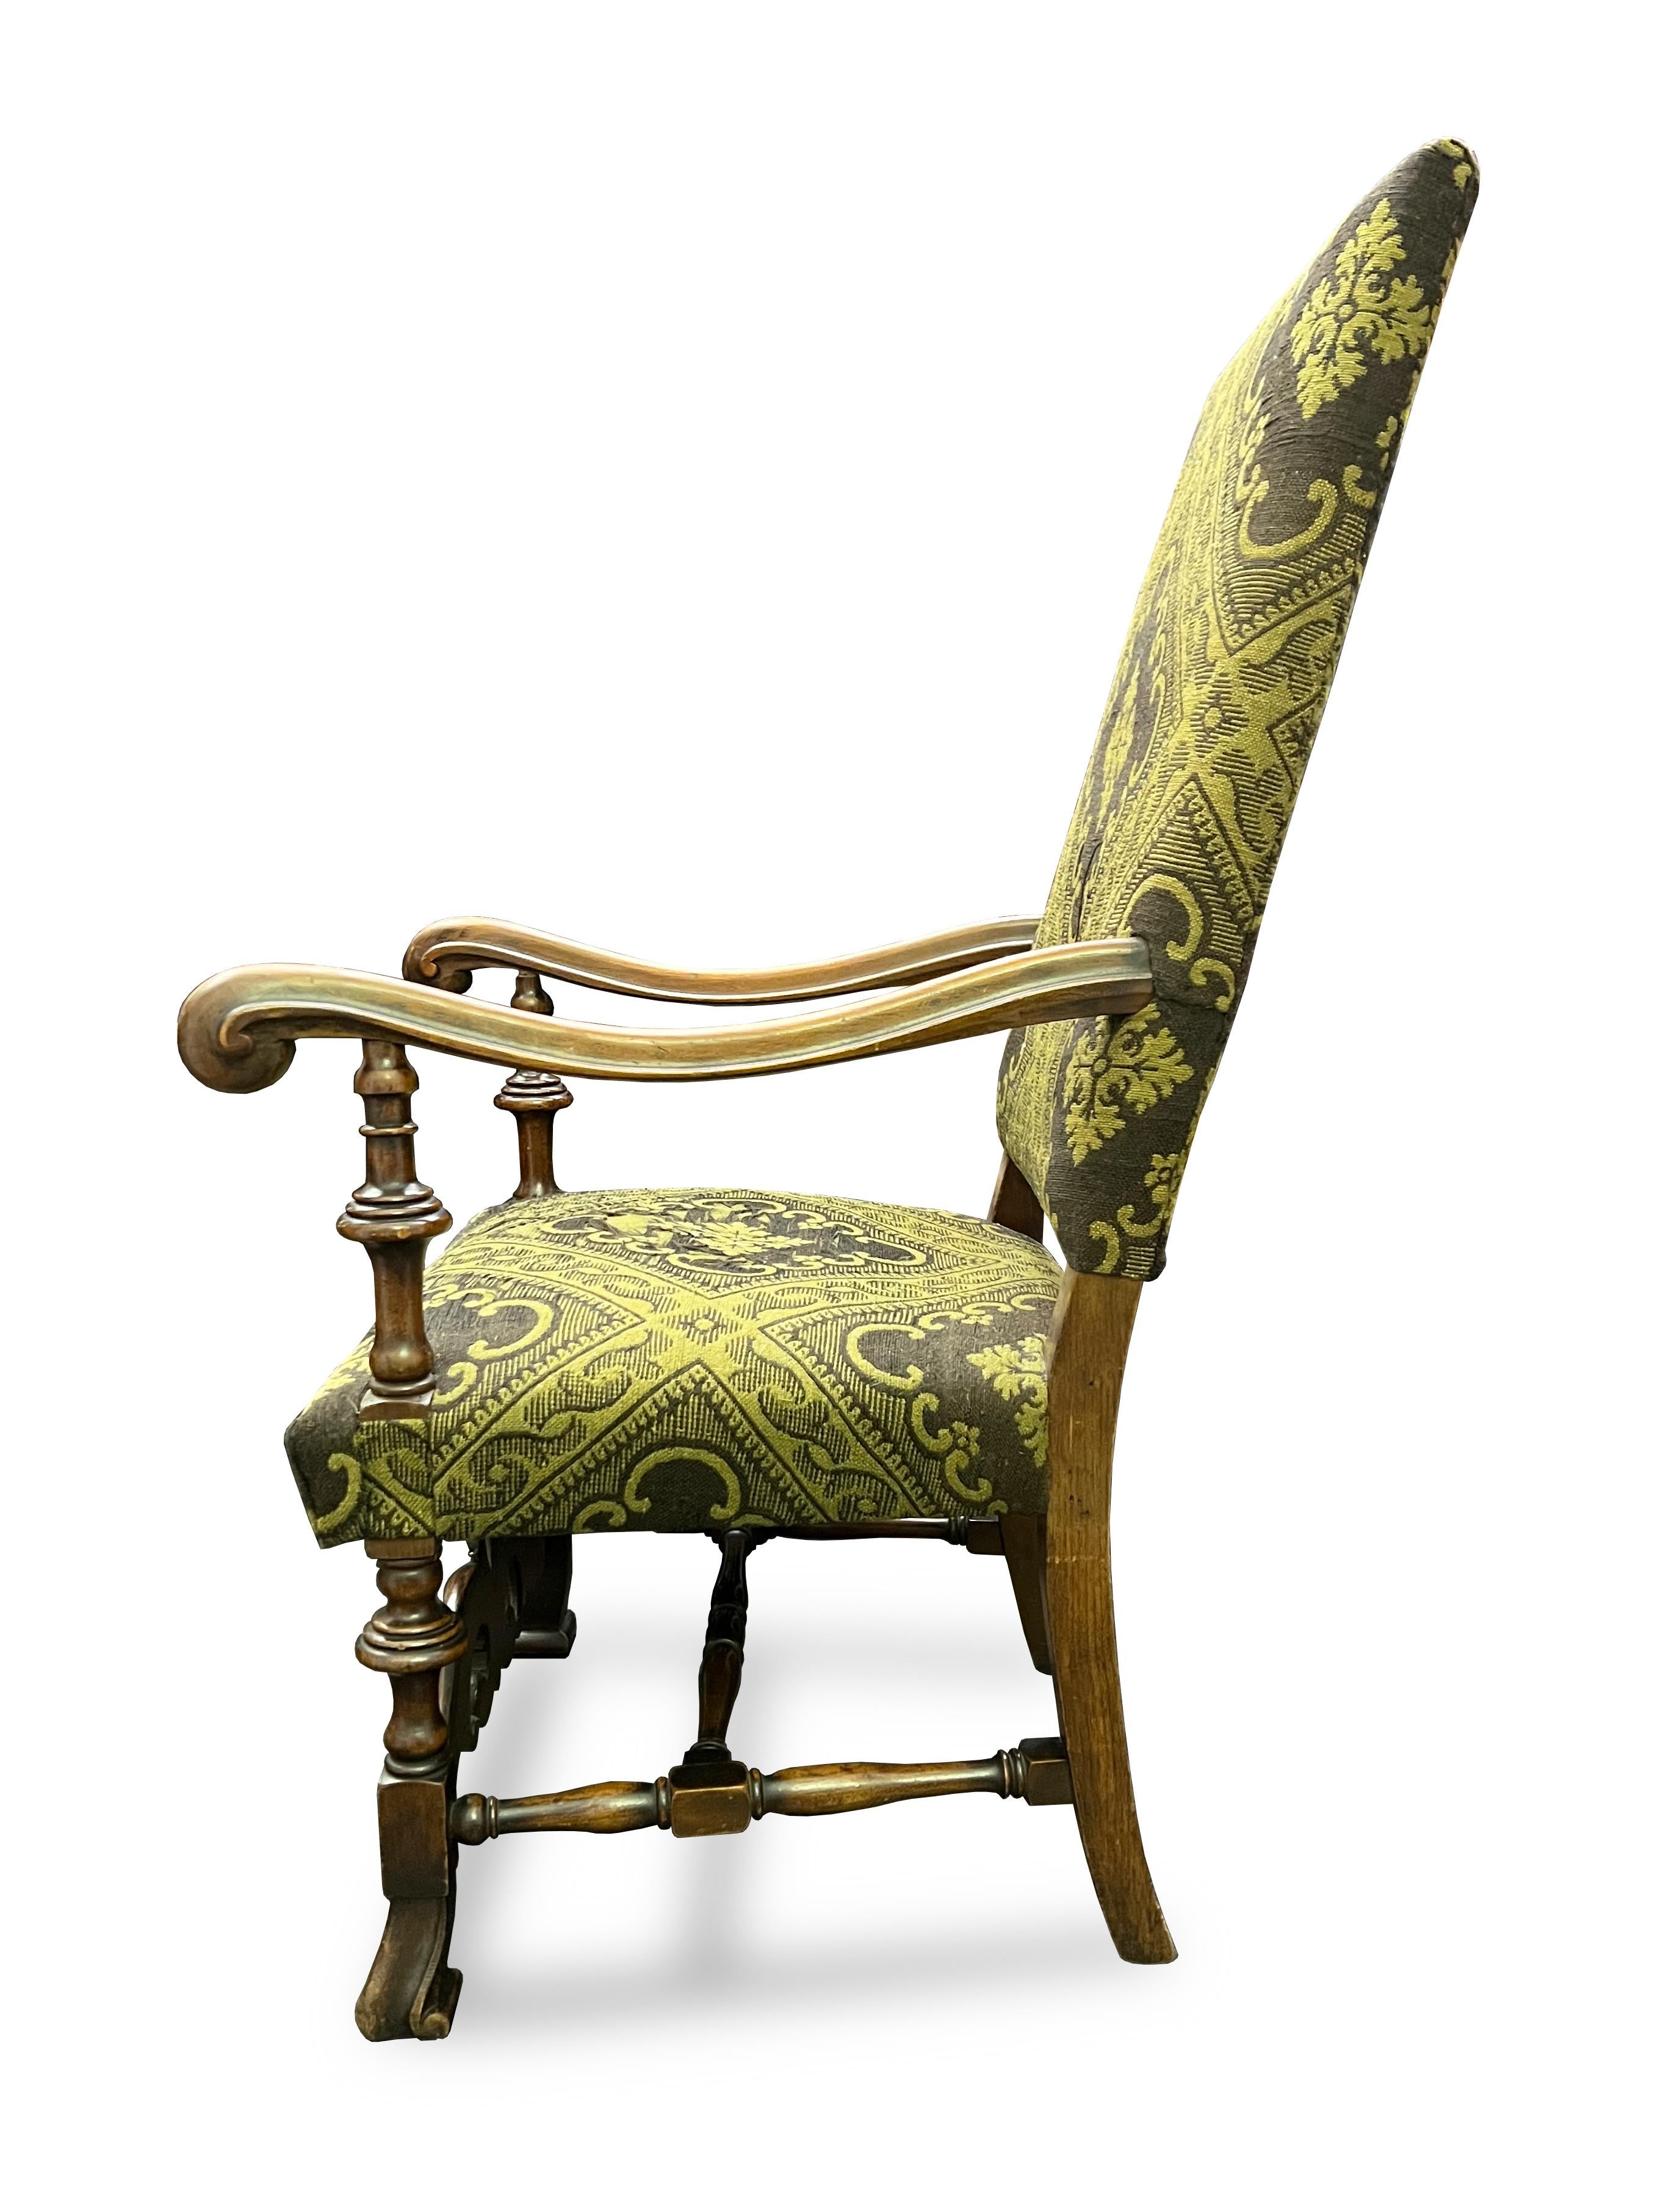 Beautiful 18th century Italian barroque armchair. Rectangular back above arms with scrolling hands and knopped supports. The front stretcher with mirrored foliate scrolls, a magnificant wood working detail.

Property from esteemed interior designer